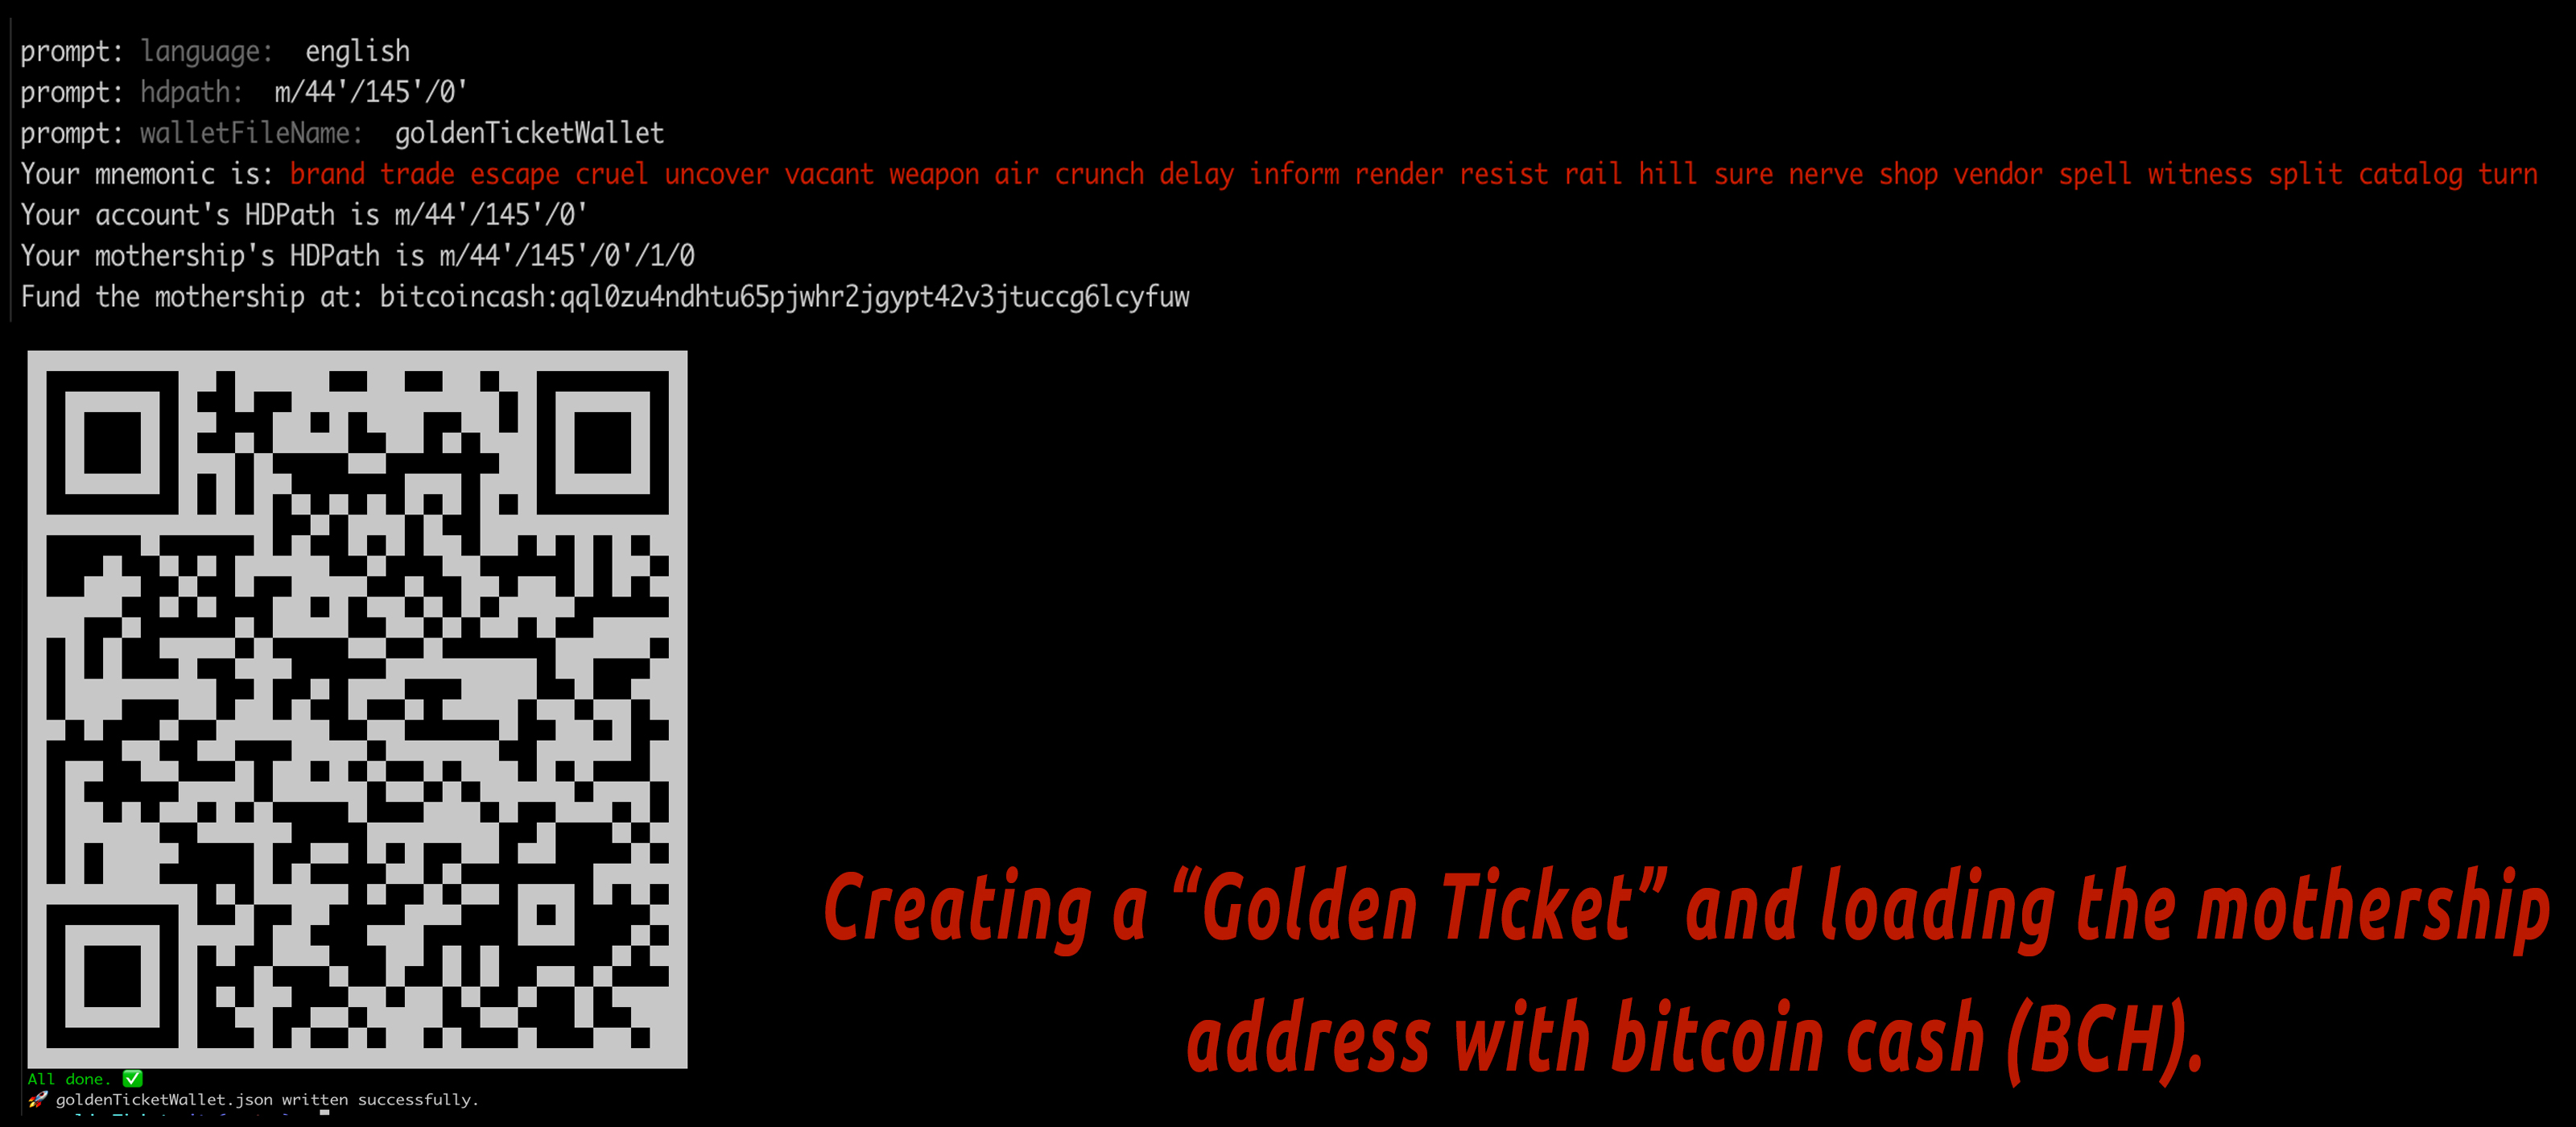 Host a BCH Giveaway With Bitcoin.com's Golden Ticket Software